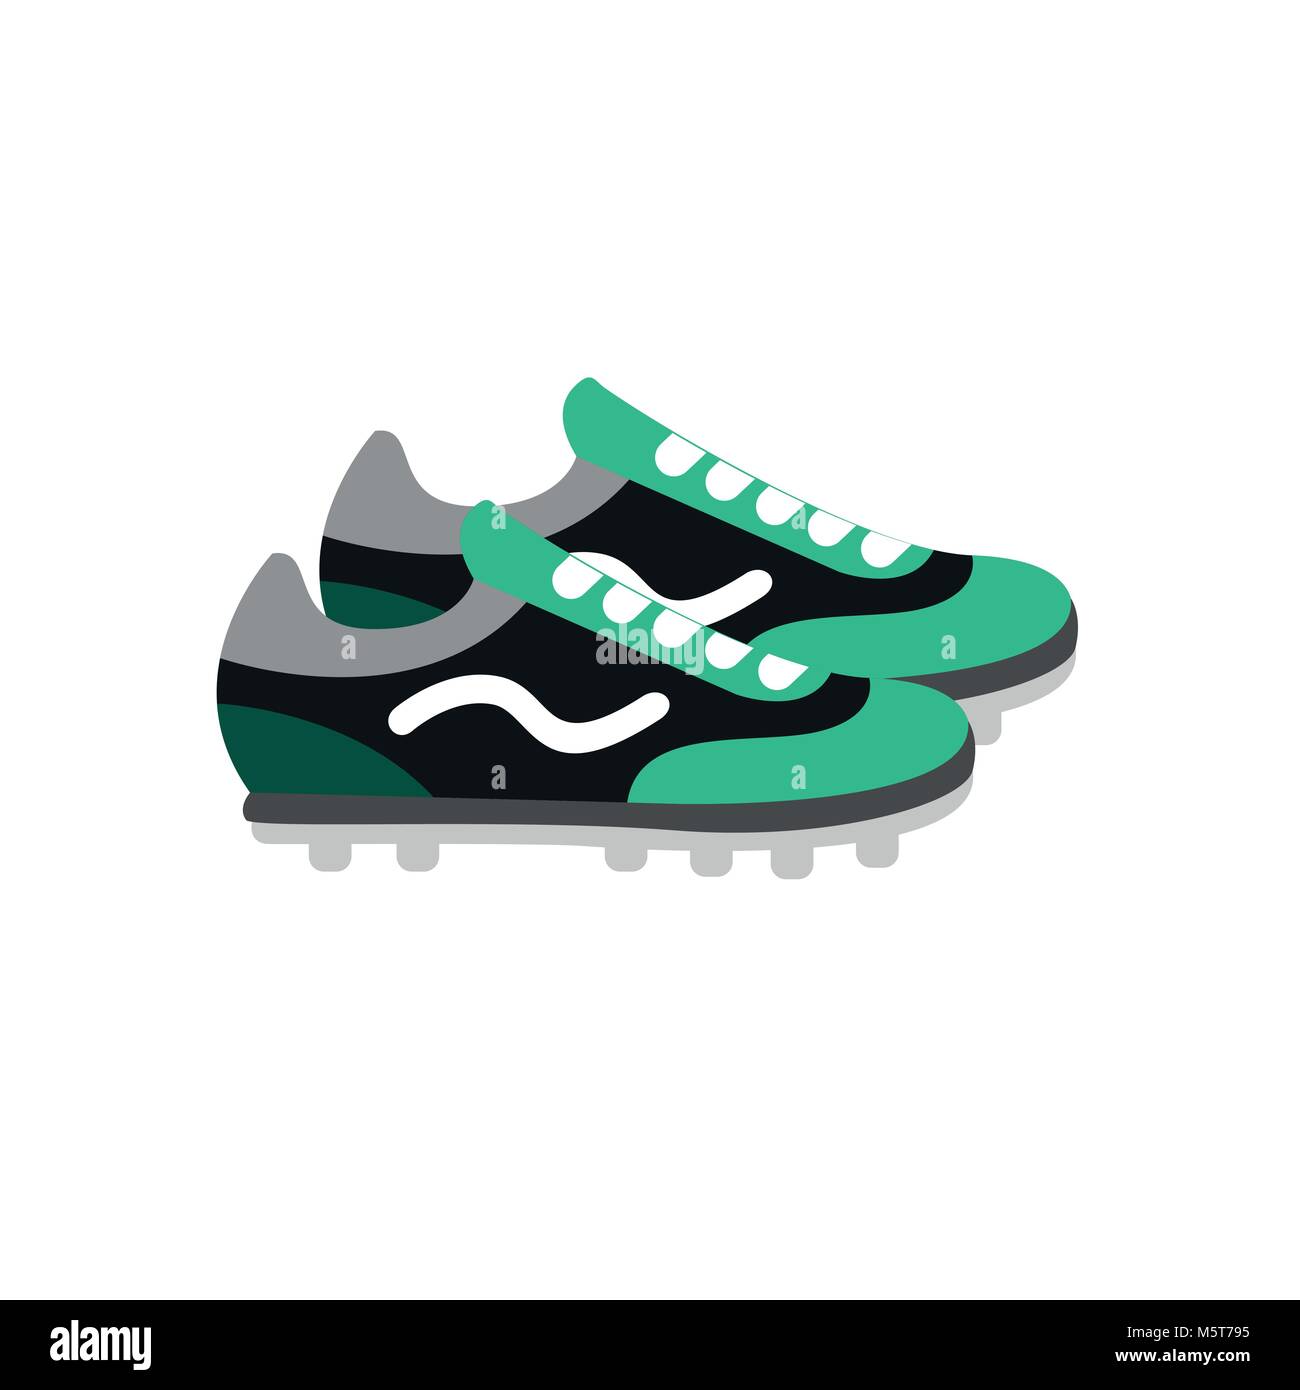 Football Shoes Soccer Illustration Vector Graphic Design Stock Vector